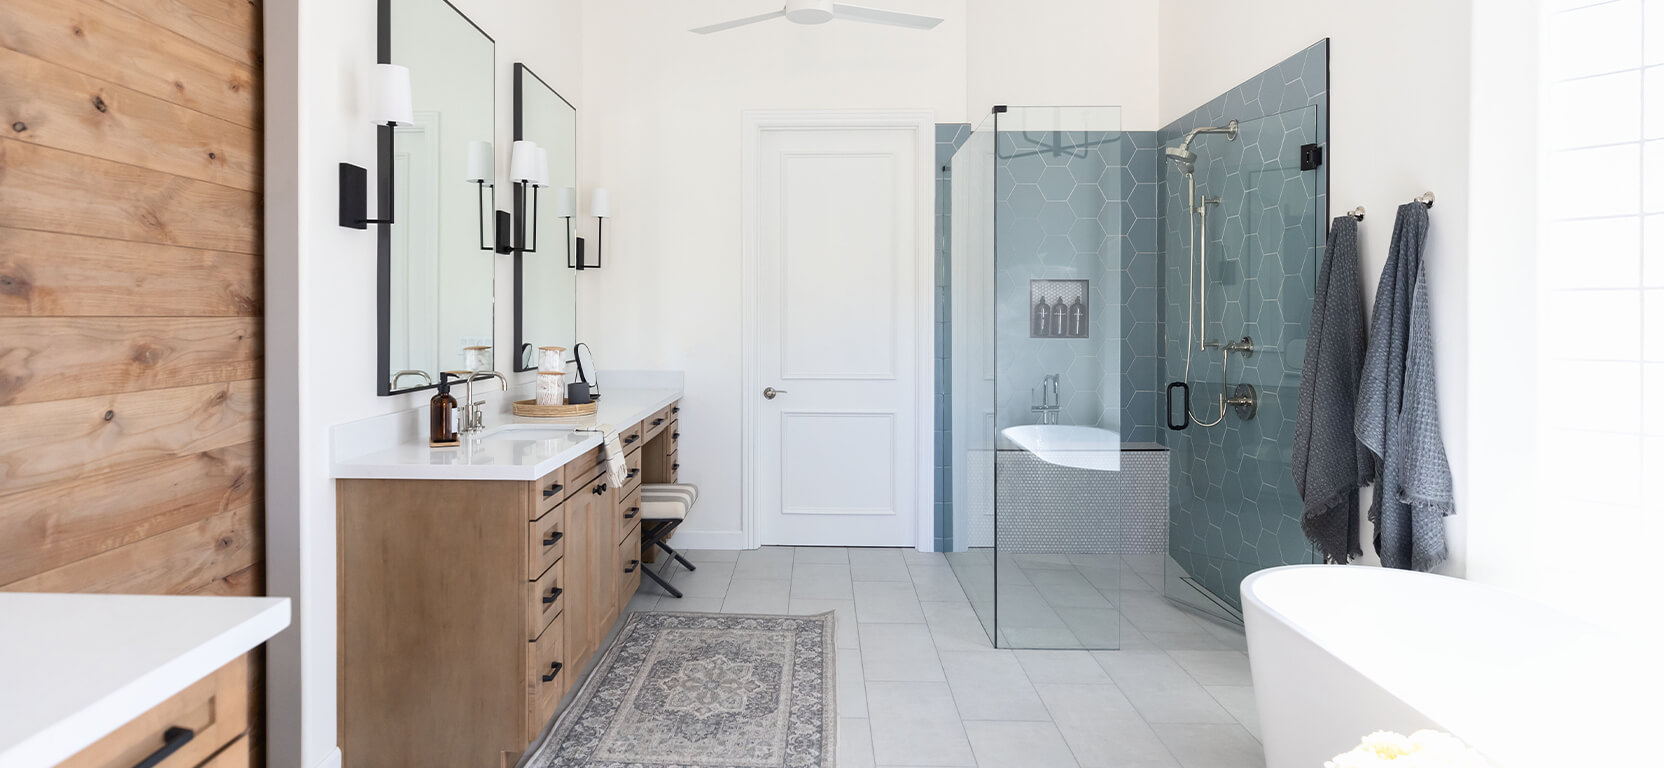 Accessible primary bathroom with glass-walled shower, natural wood double vanities and a freestanding modern bathtub.